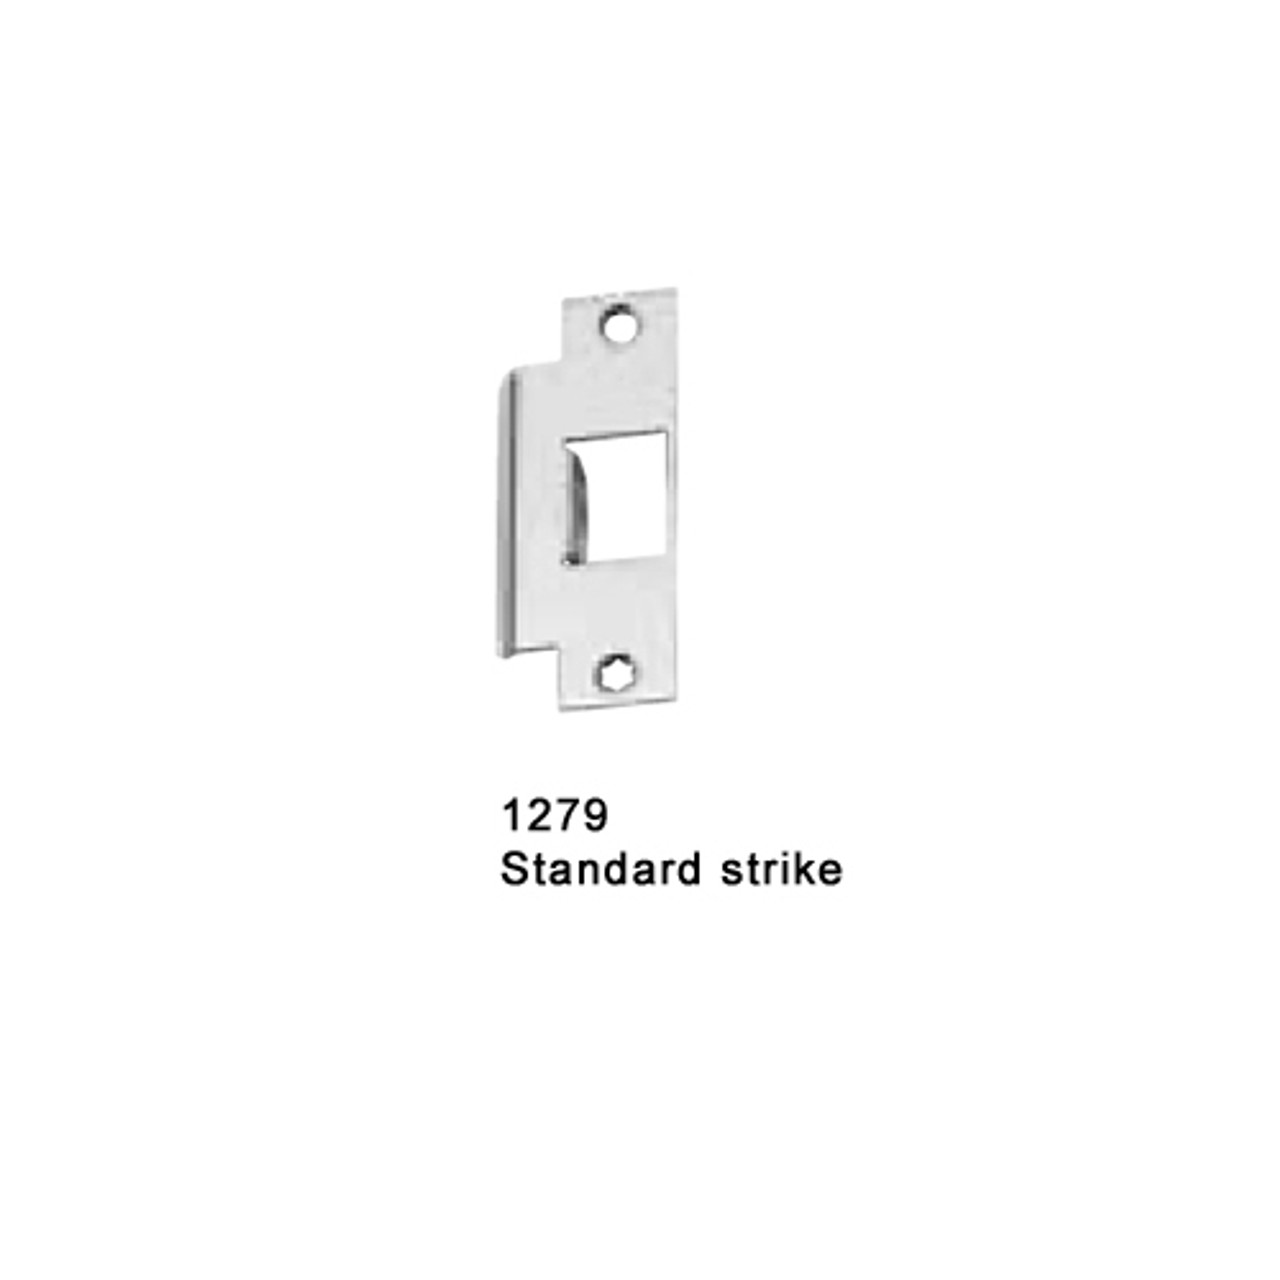 F-25-M-DT-US32-4-RHR Falcon 25 Series Fire Rated Mortise Lock Devices with 512DT Dummy Trim in Polished Stainless Steel